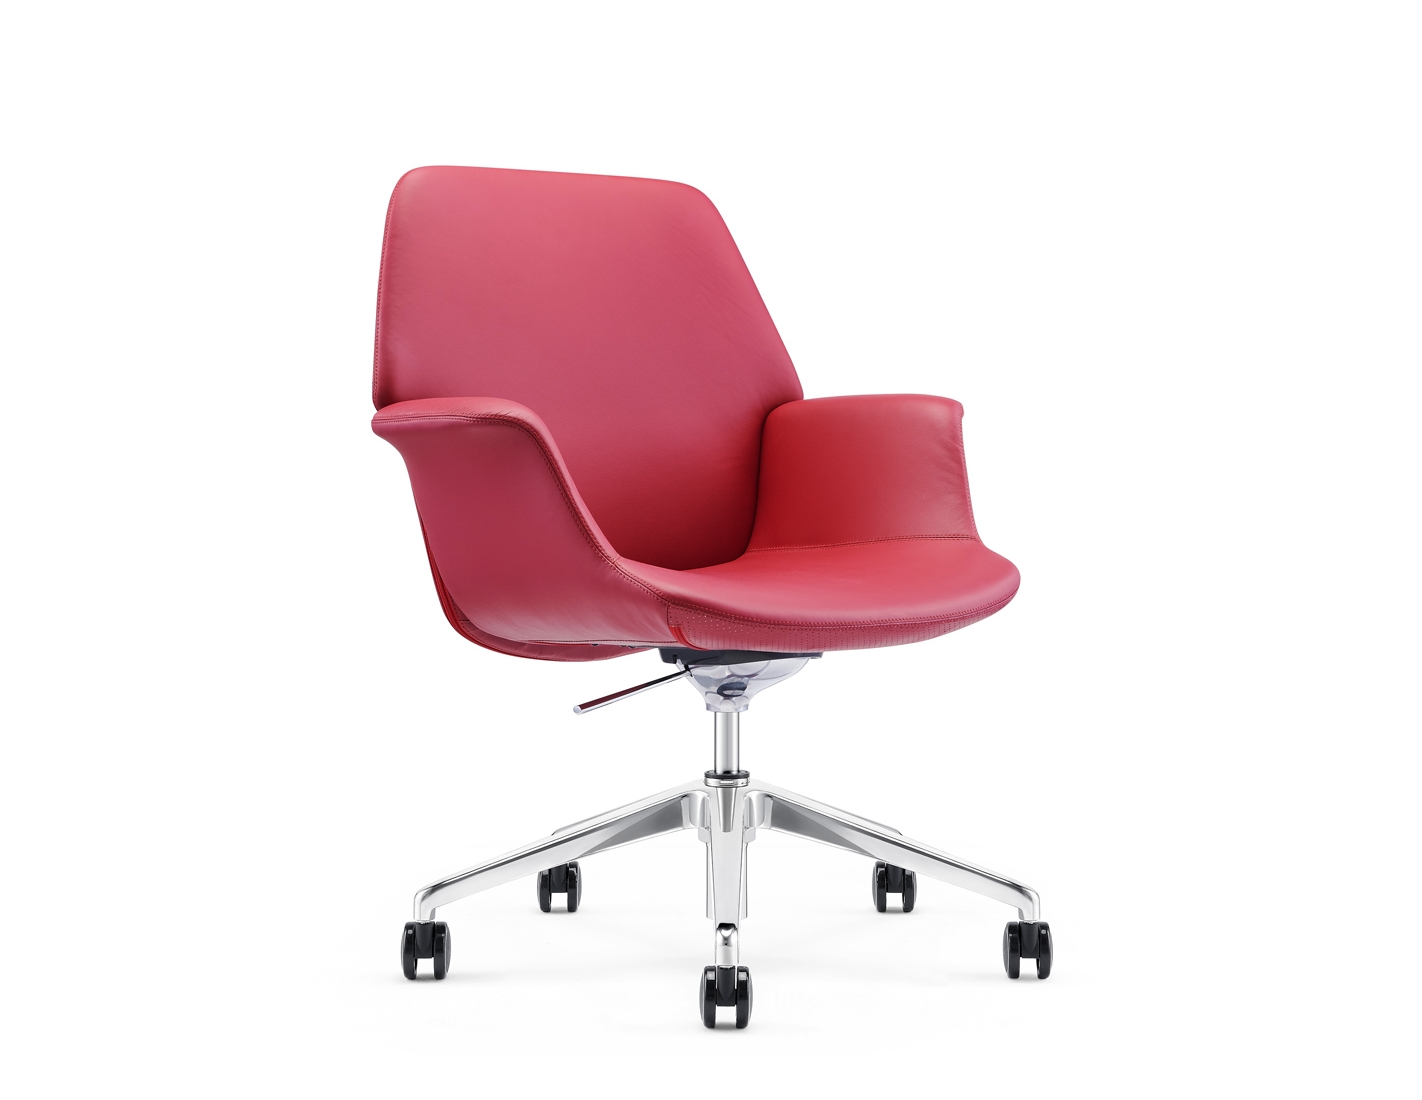 Rossa Leather Rose Red Low Back Swivel Armchair | IDWorkspace Offic...